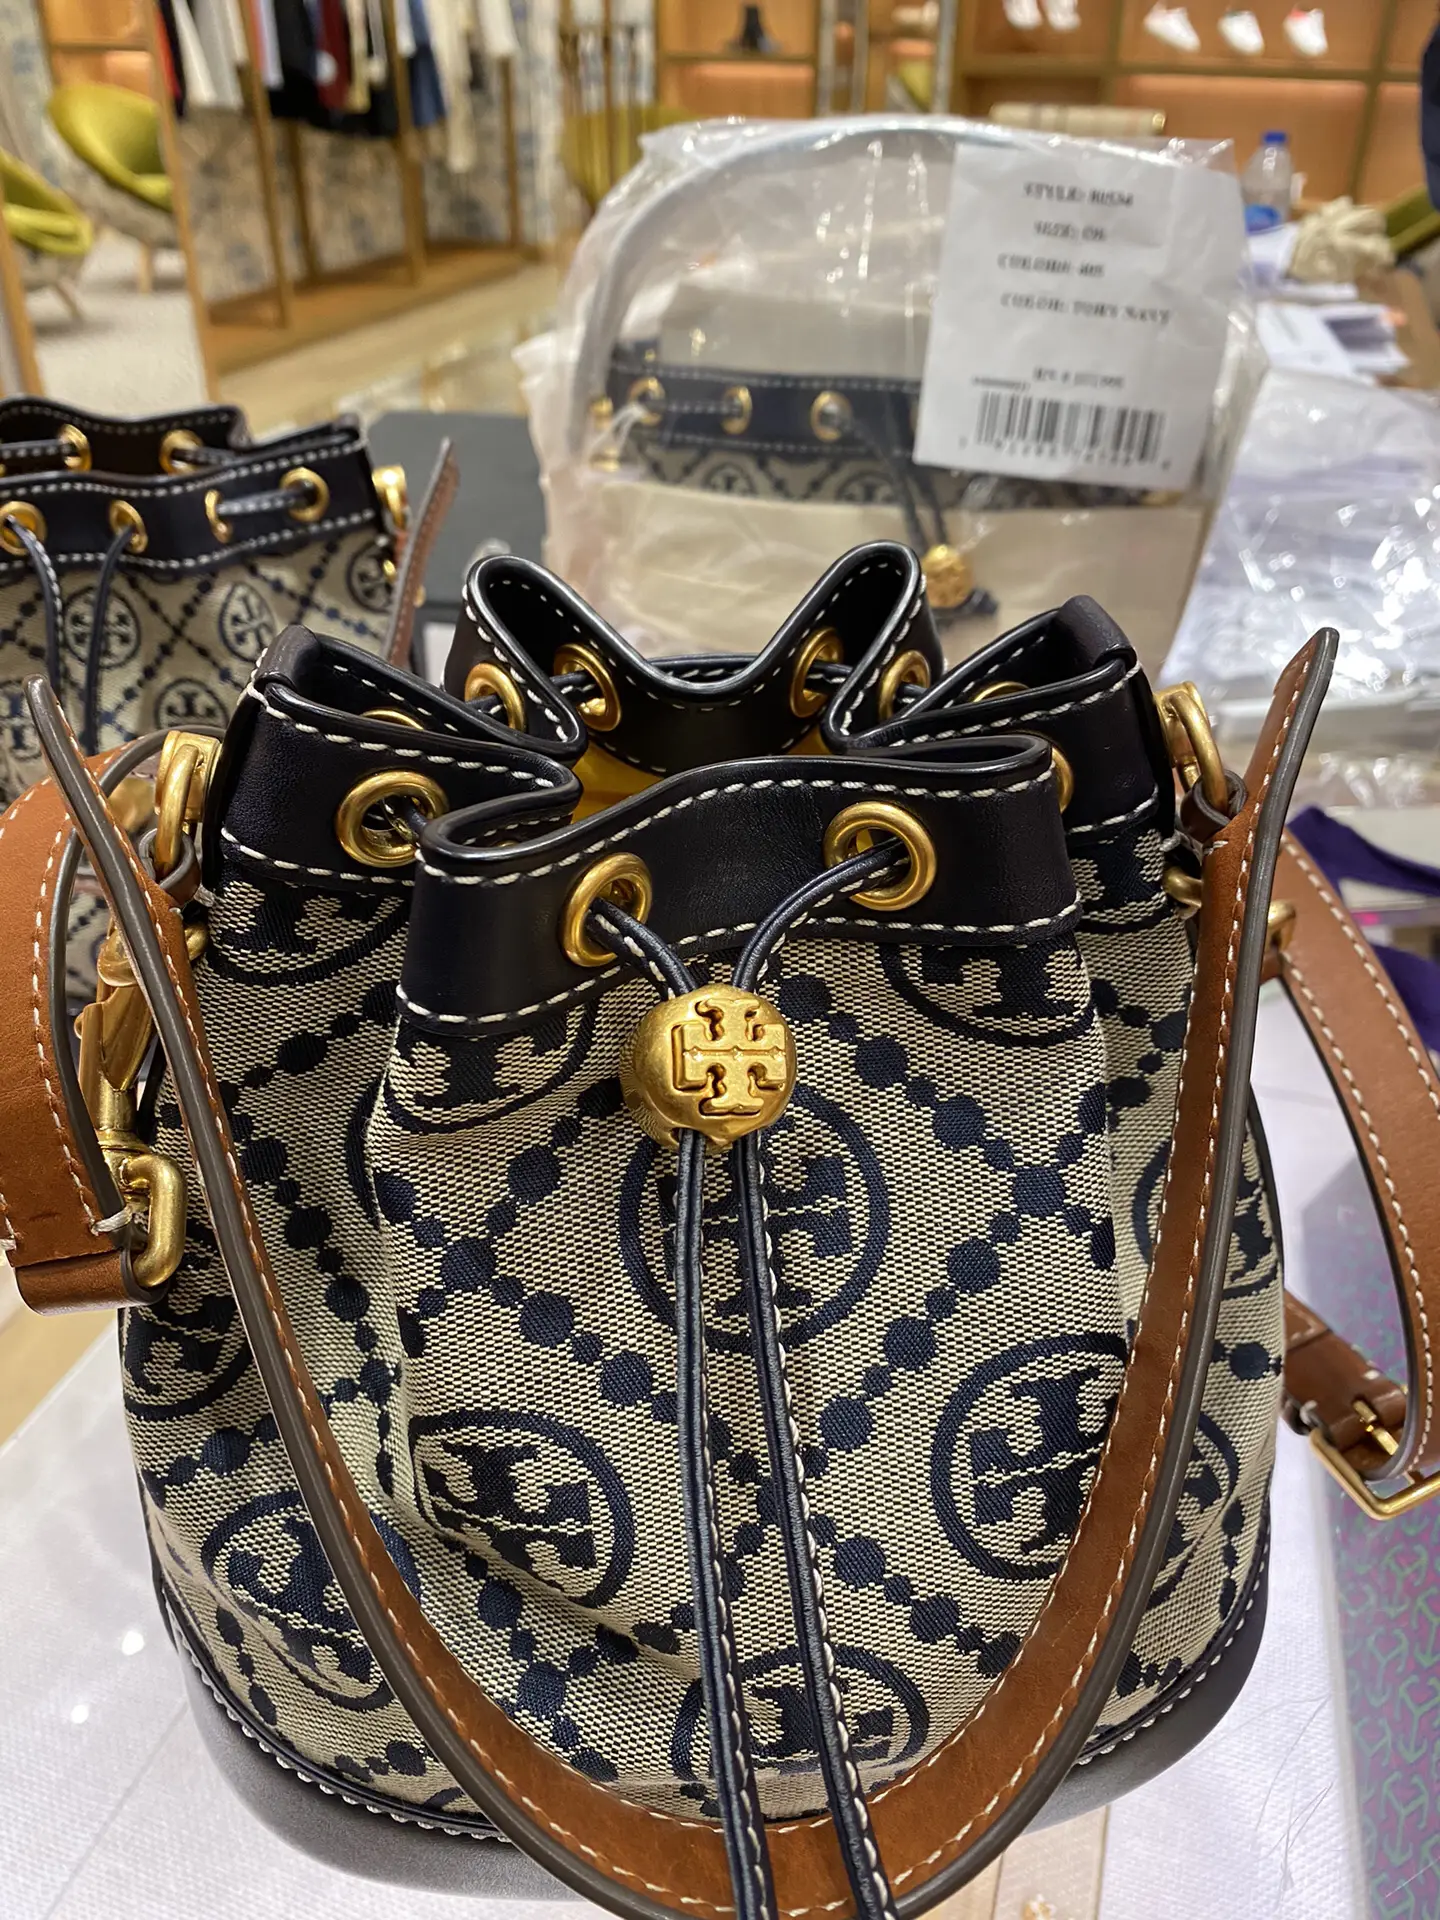 Floral Block T Small Bucket Bag by Tory Burch Accessories for $20